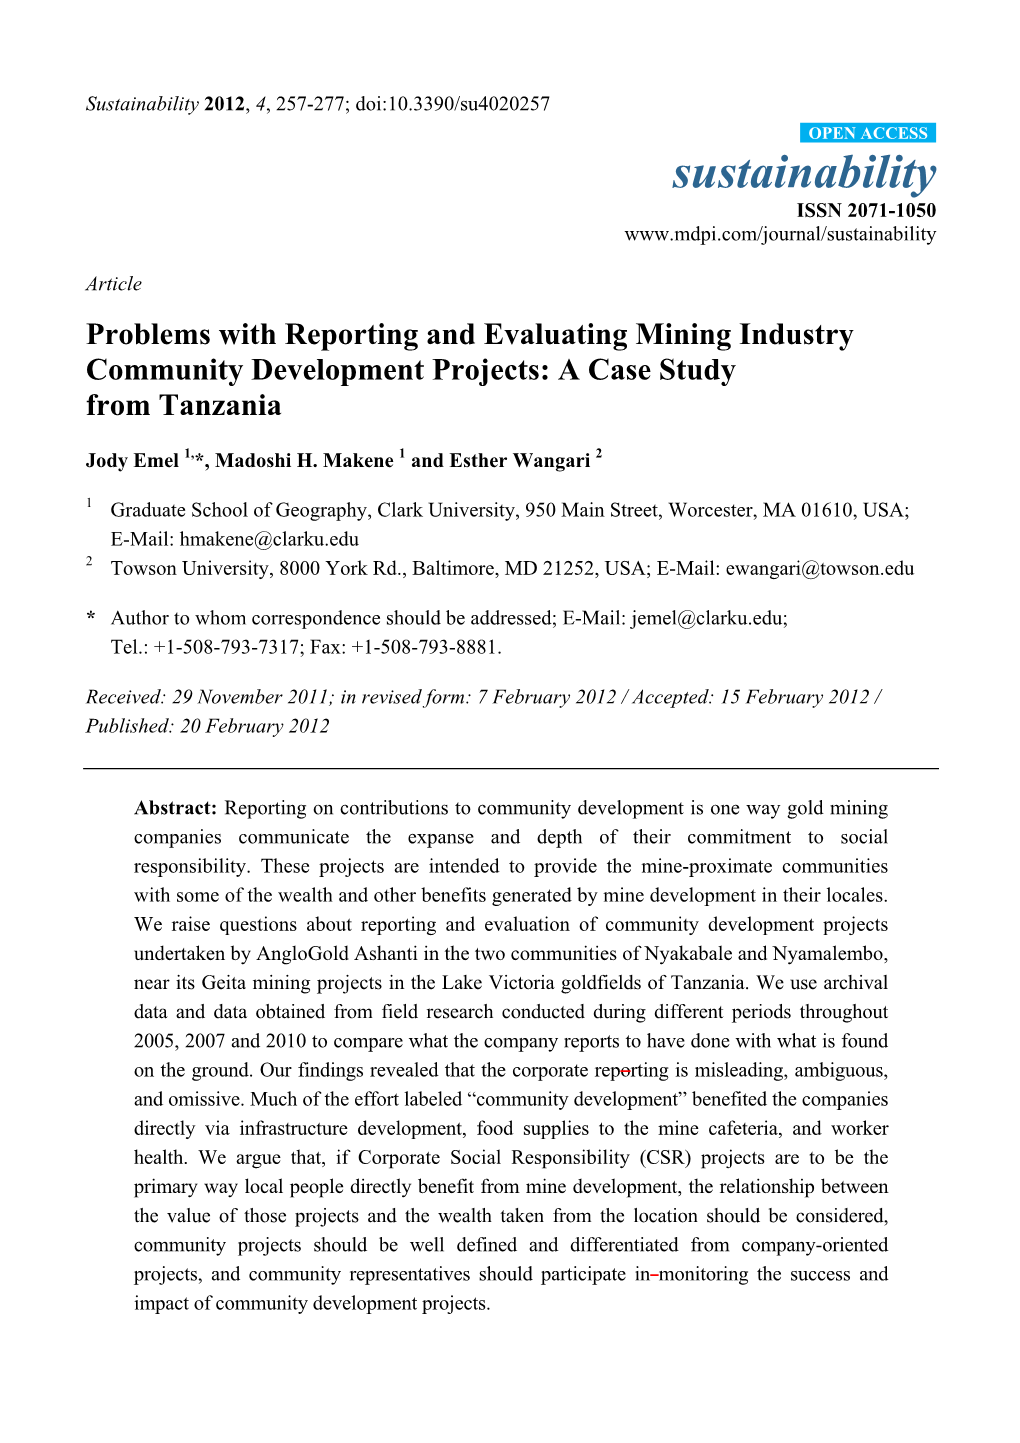 Problems with Reporting and Evaluating Mining Industry Community Development Projects: a Case Study from Tanzania